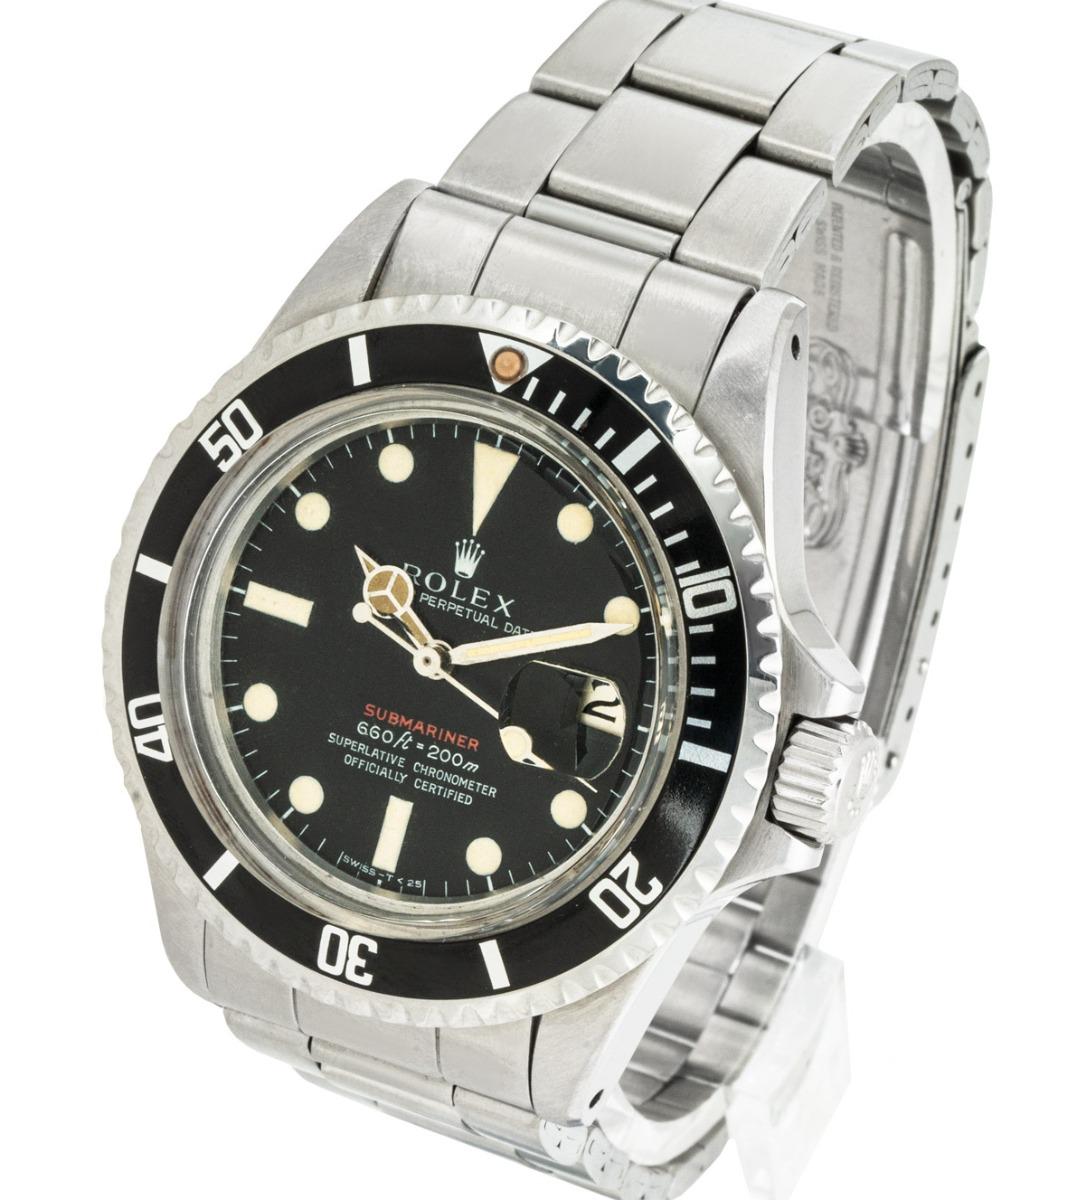 Rolex Vintage Submariner Mark IV Dial1680 In Excellent Condition For Sale In London, GB